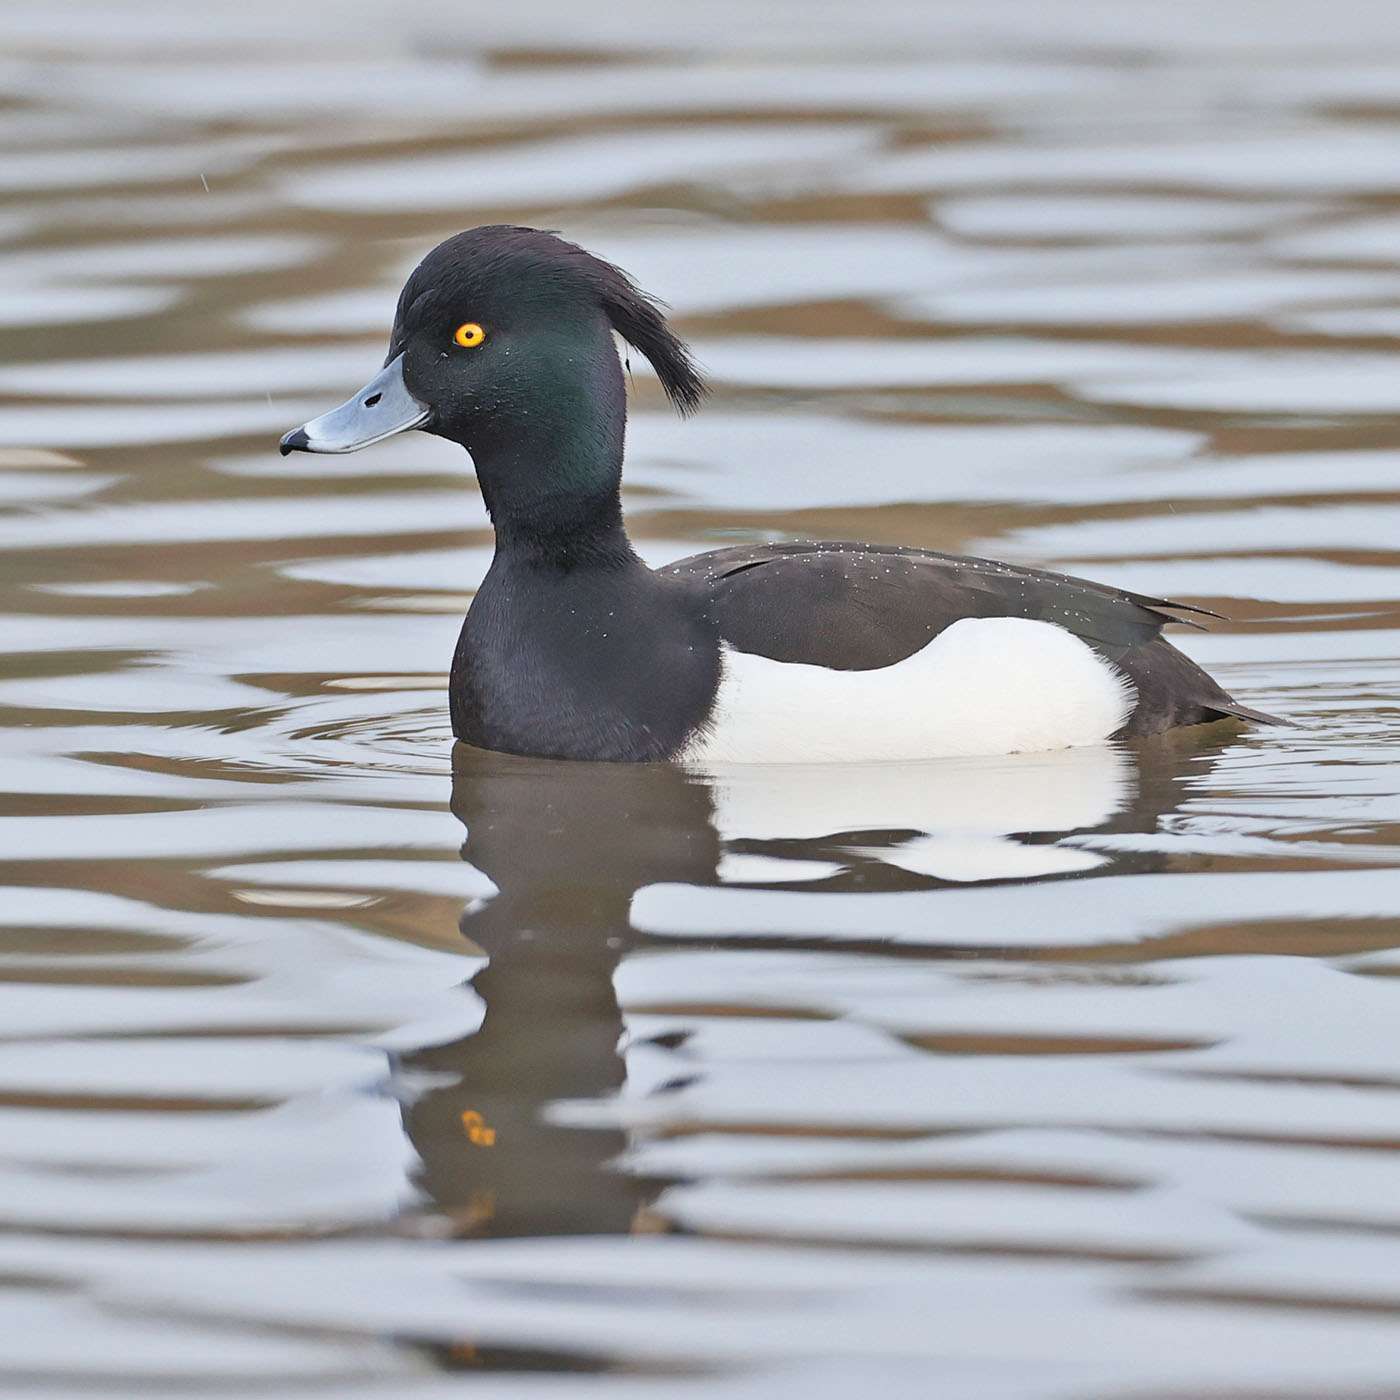 Tufted Duck by Steve Hopper at Paignton